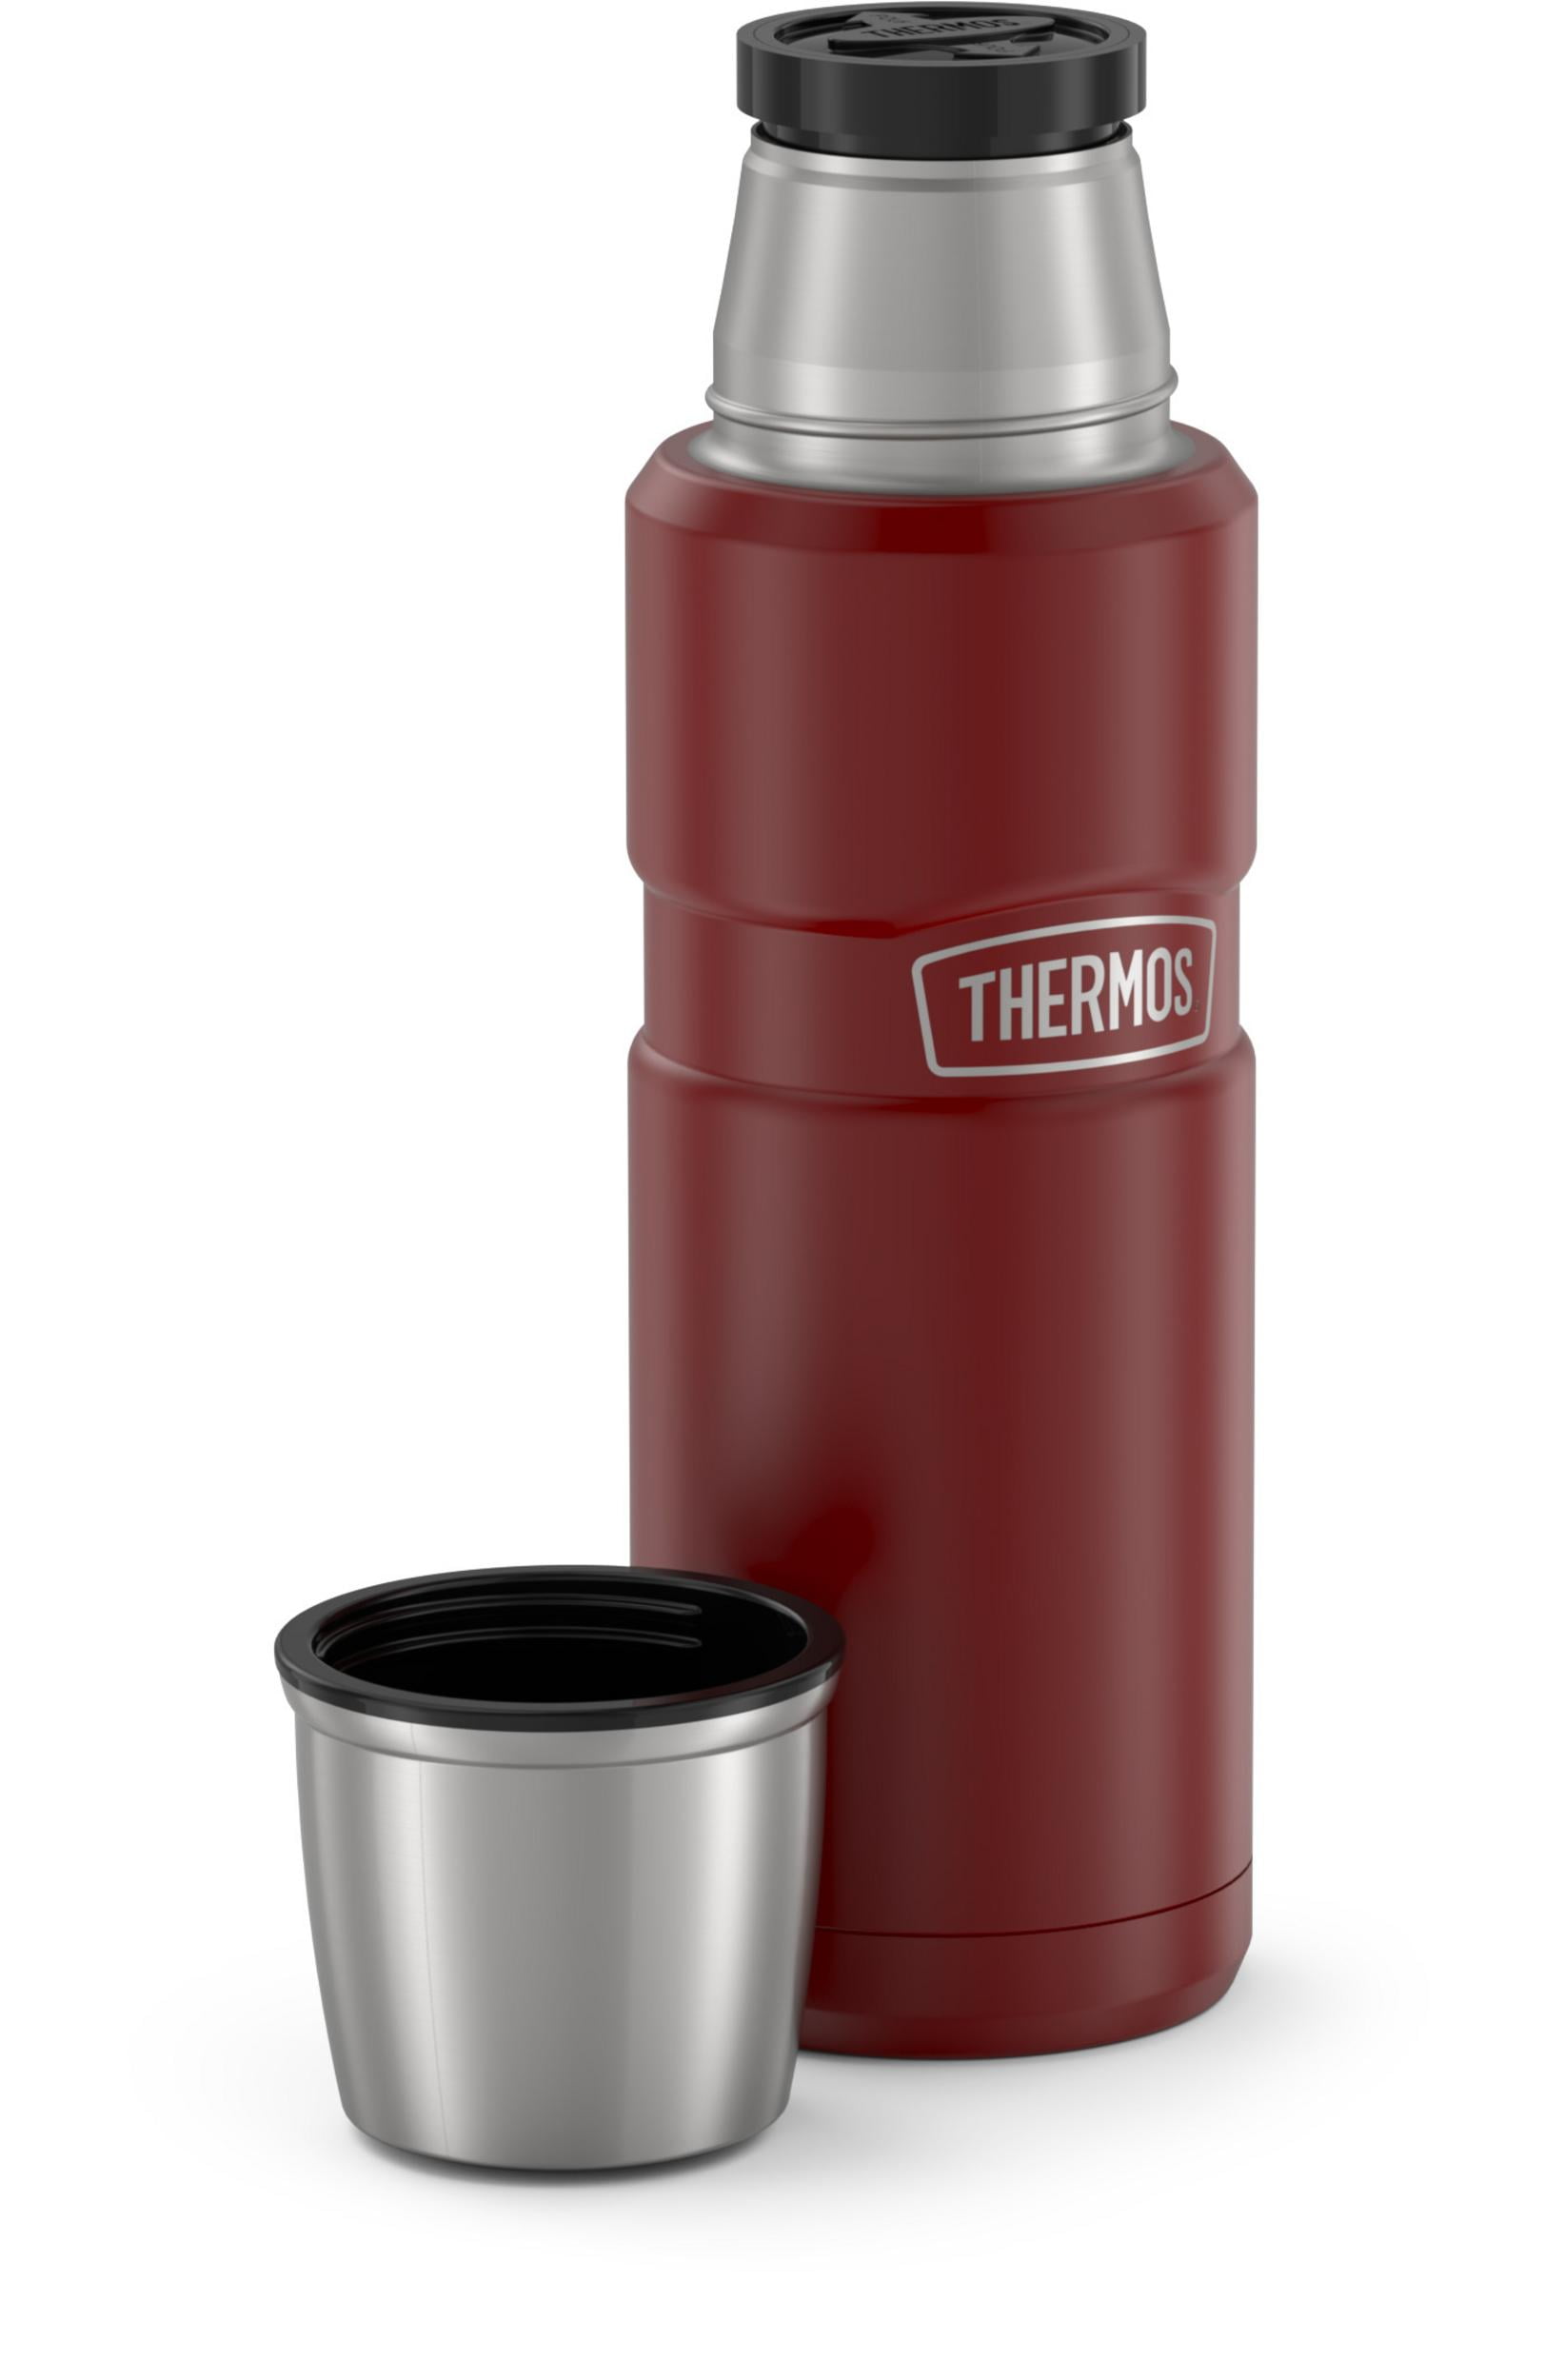 Thermos Stainless King Vacuum Insulated Stainless Steel Beverage Bottle,  16oz, Matte Rustic Red